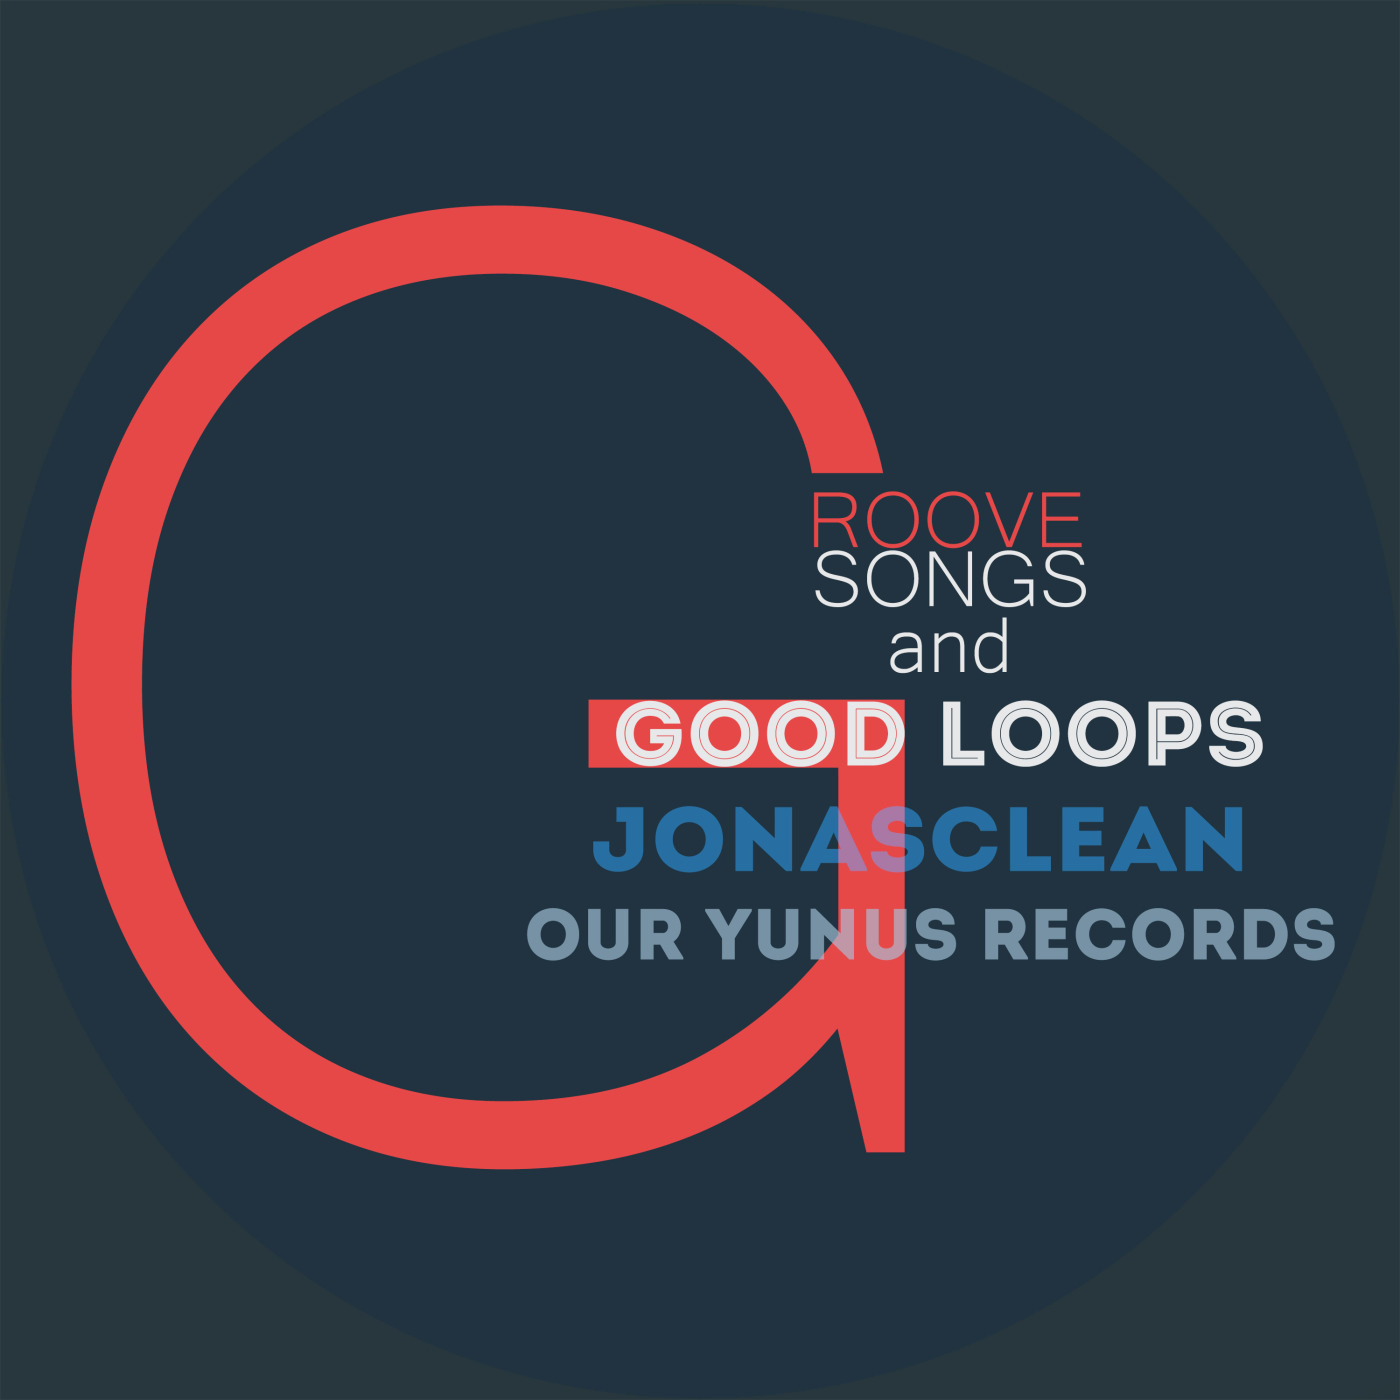 Jonasclean - Good Loops and Groove Songs Series Selection / Our Yunus Records